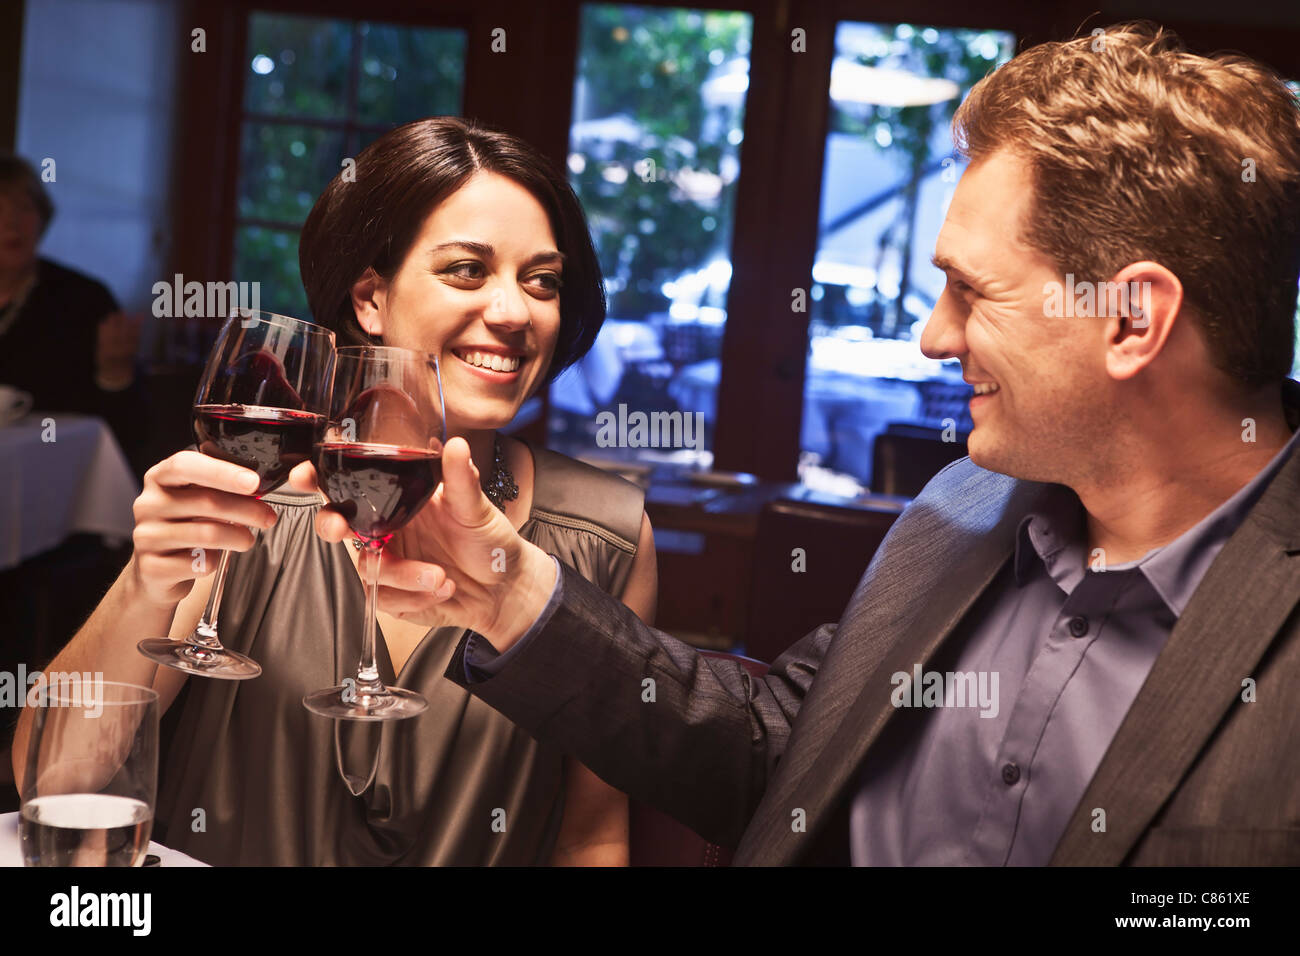 Couple toasting with red wine in restaurant Stock Photo